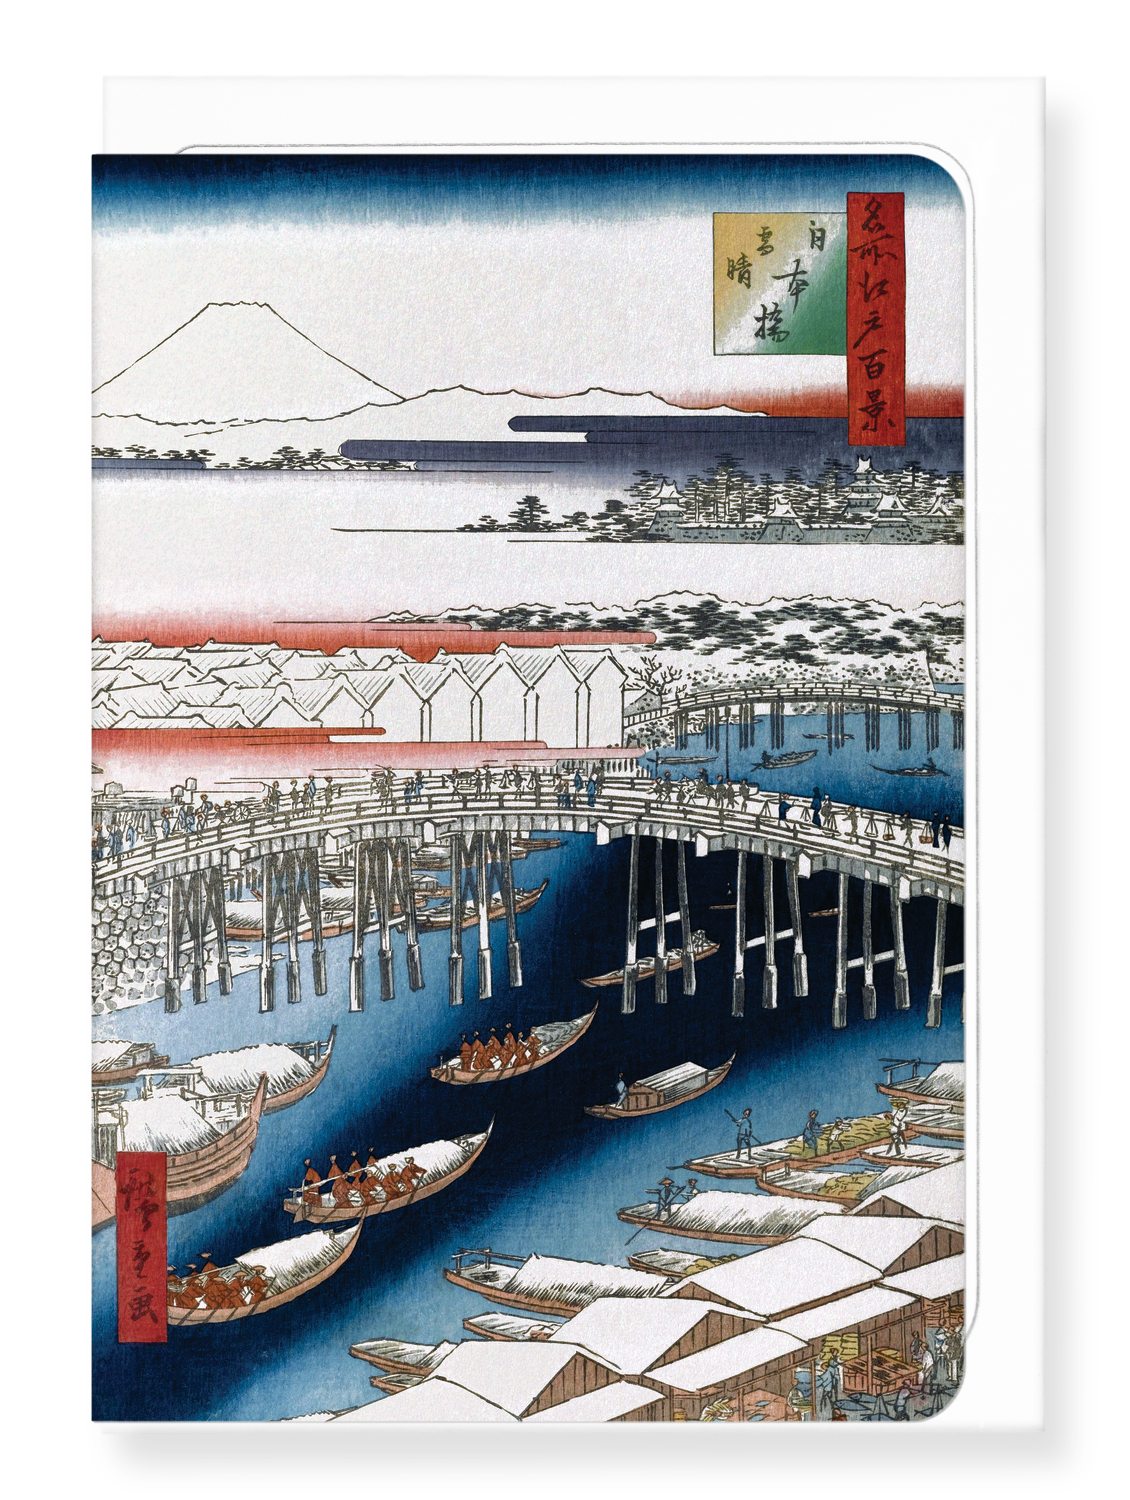 Ezen Designs - Nihonbashi, Clearing After Snow (1856) - Greeting Card - Front